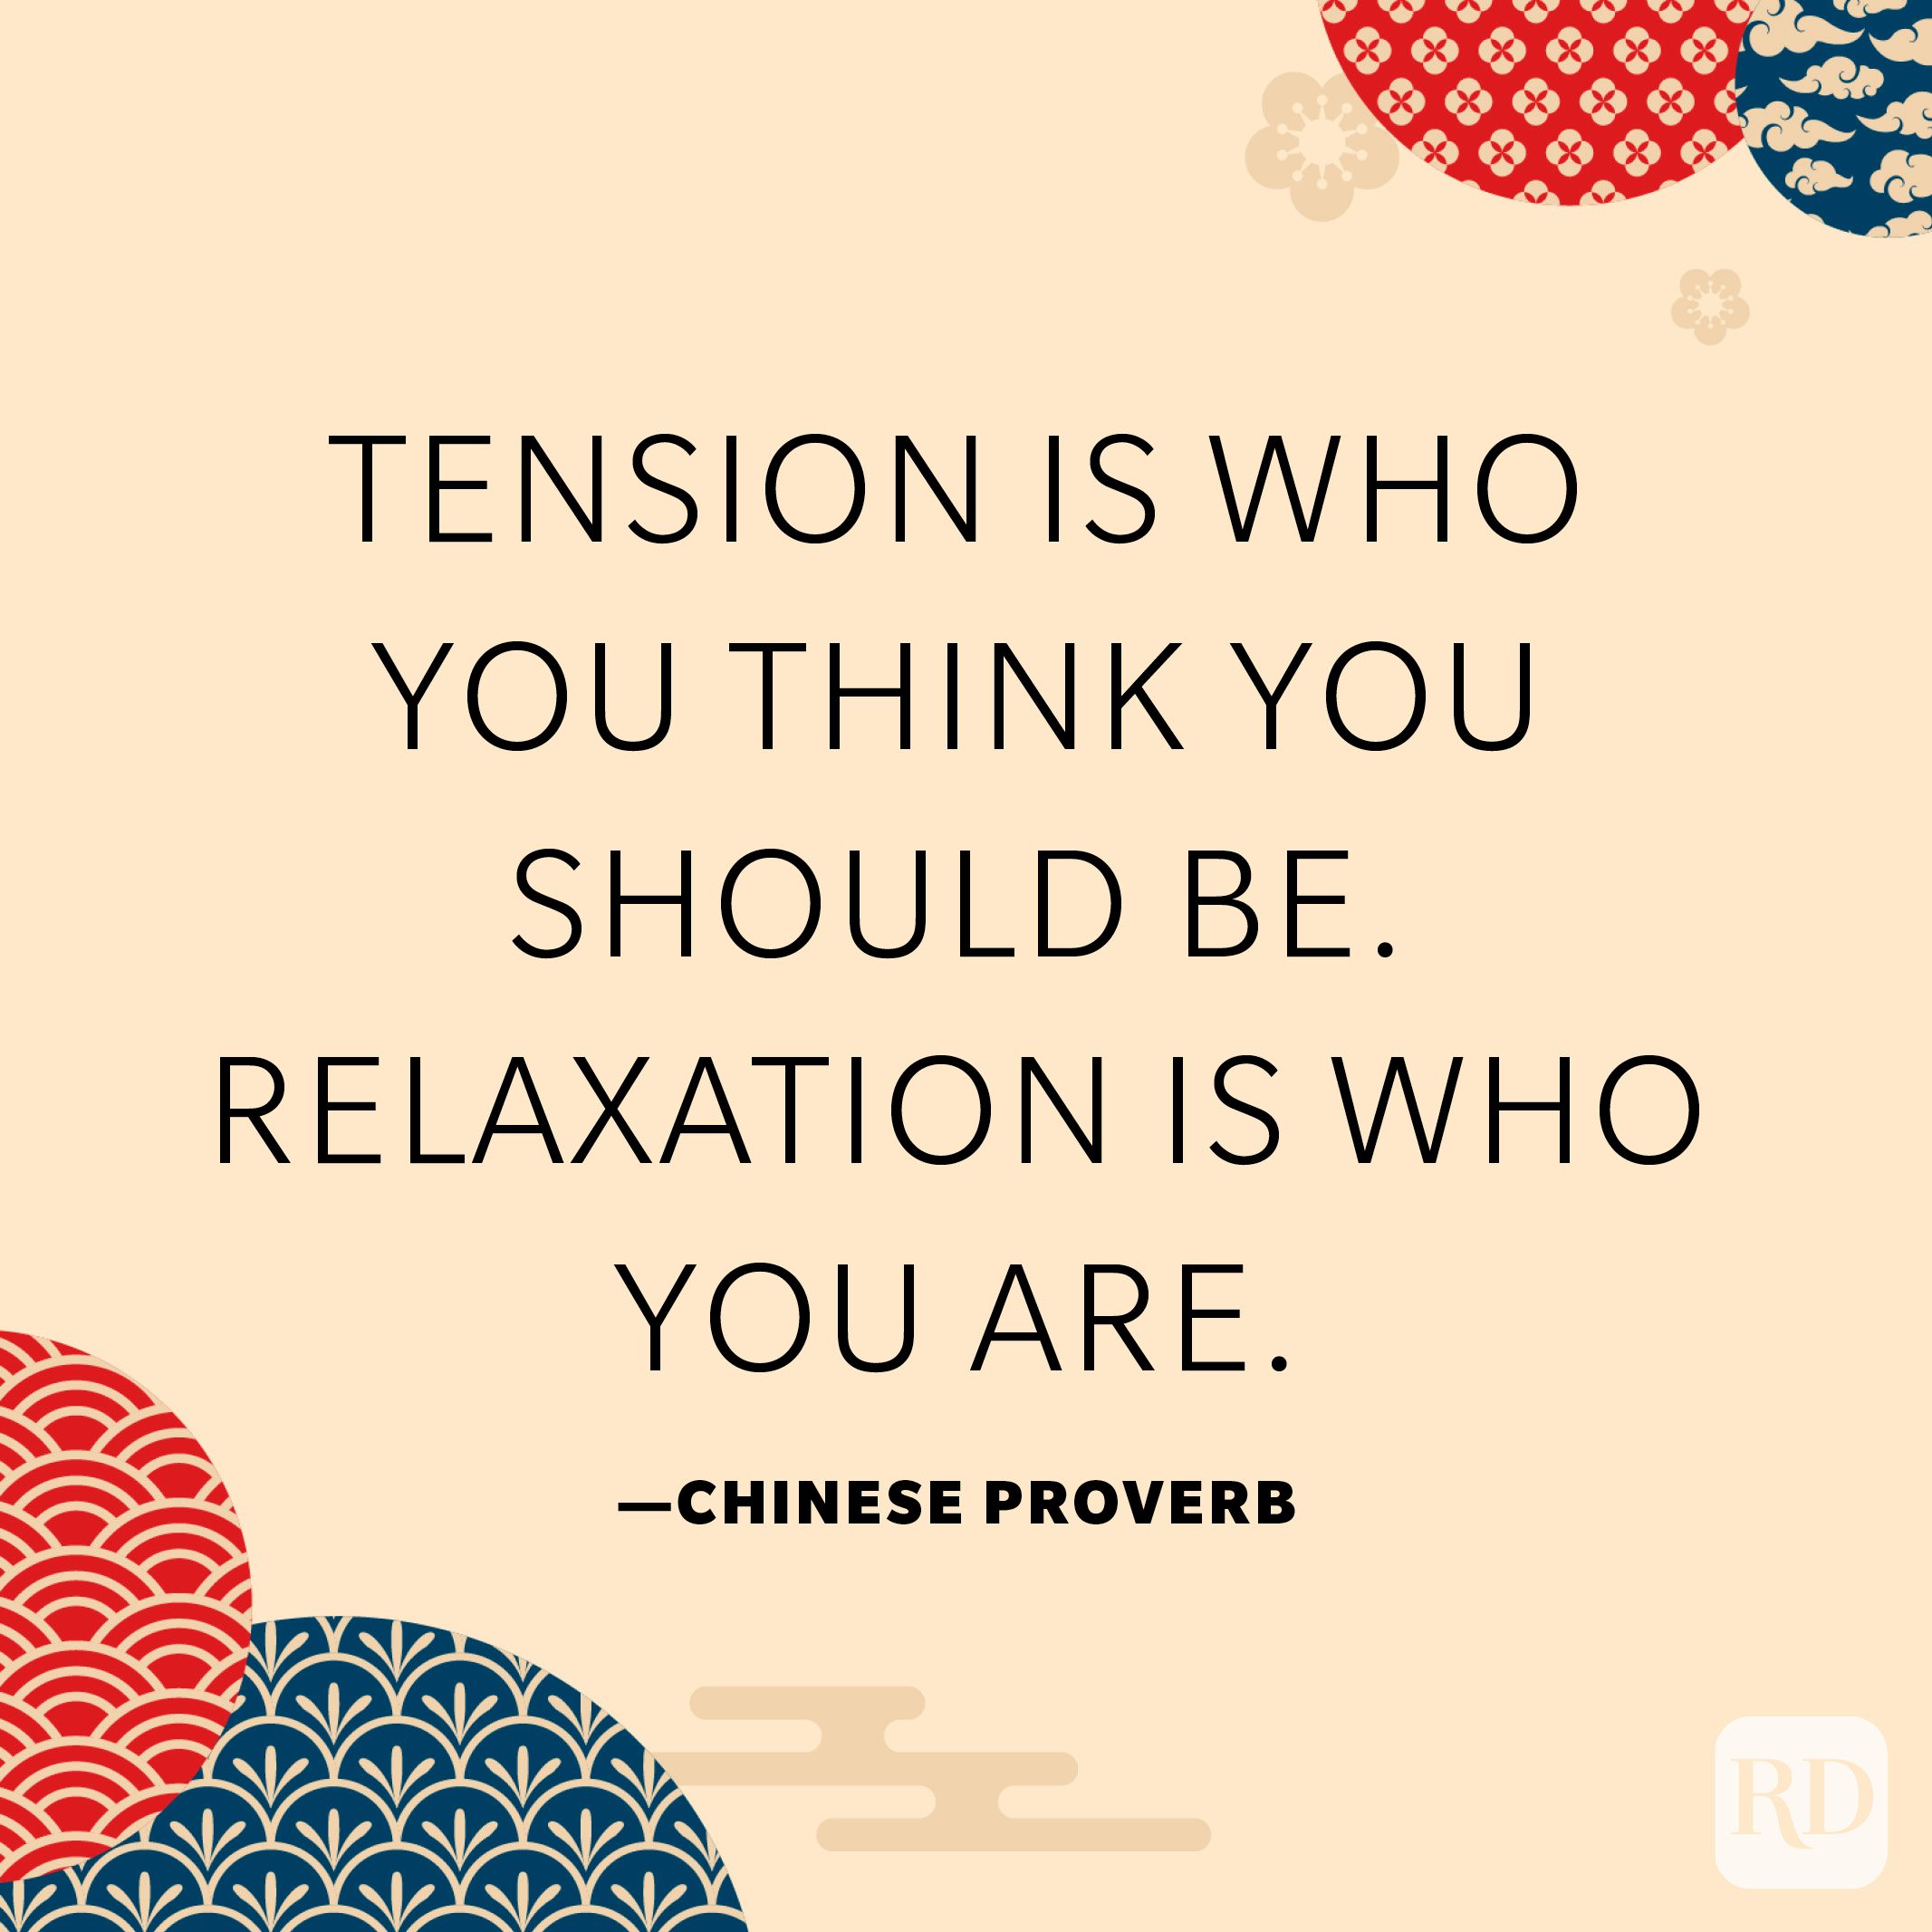 Tension is who you think you should be. Relaxation is who you are.